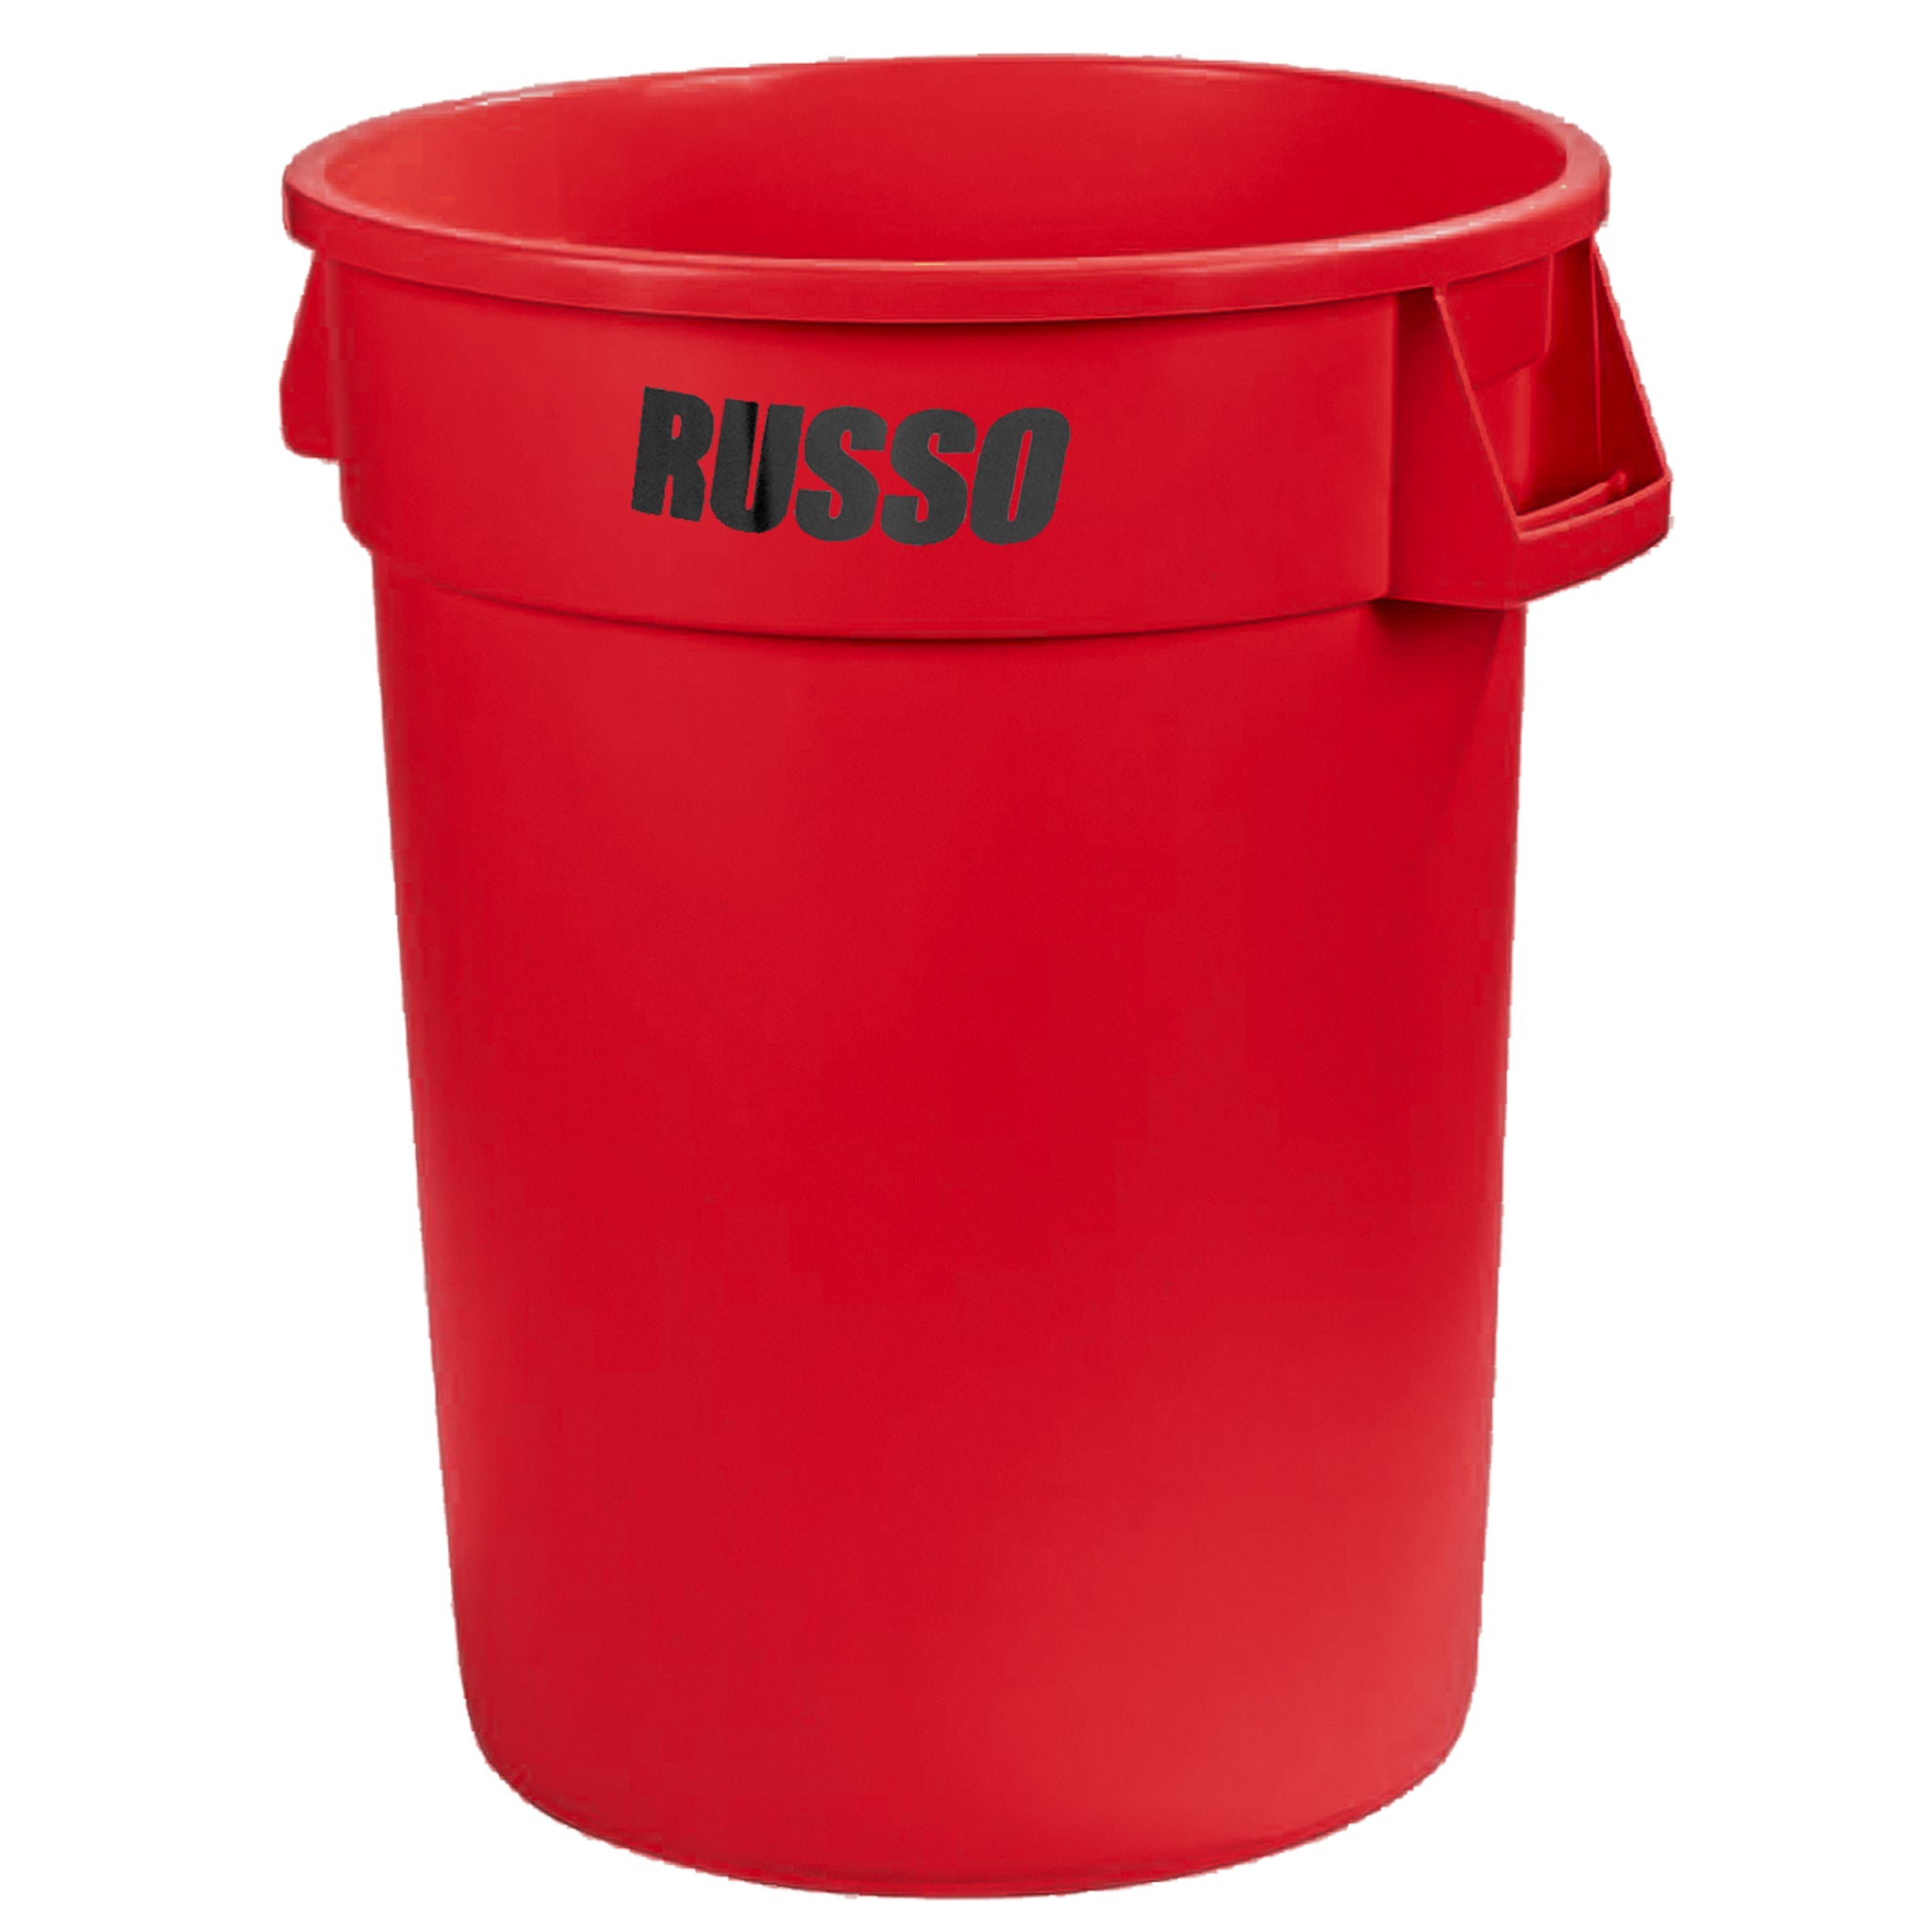 RUSSO 2642 Red Glow Can 32 Gallon